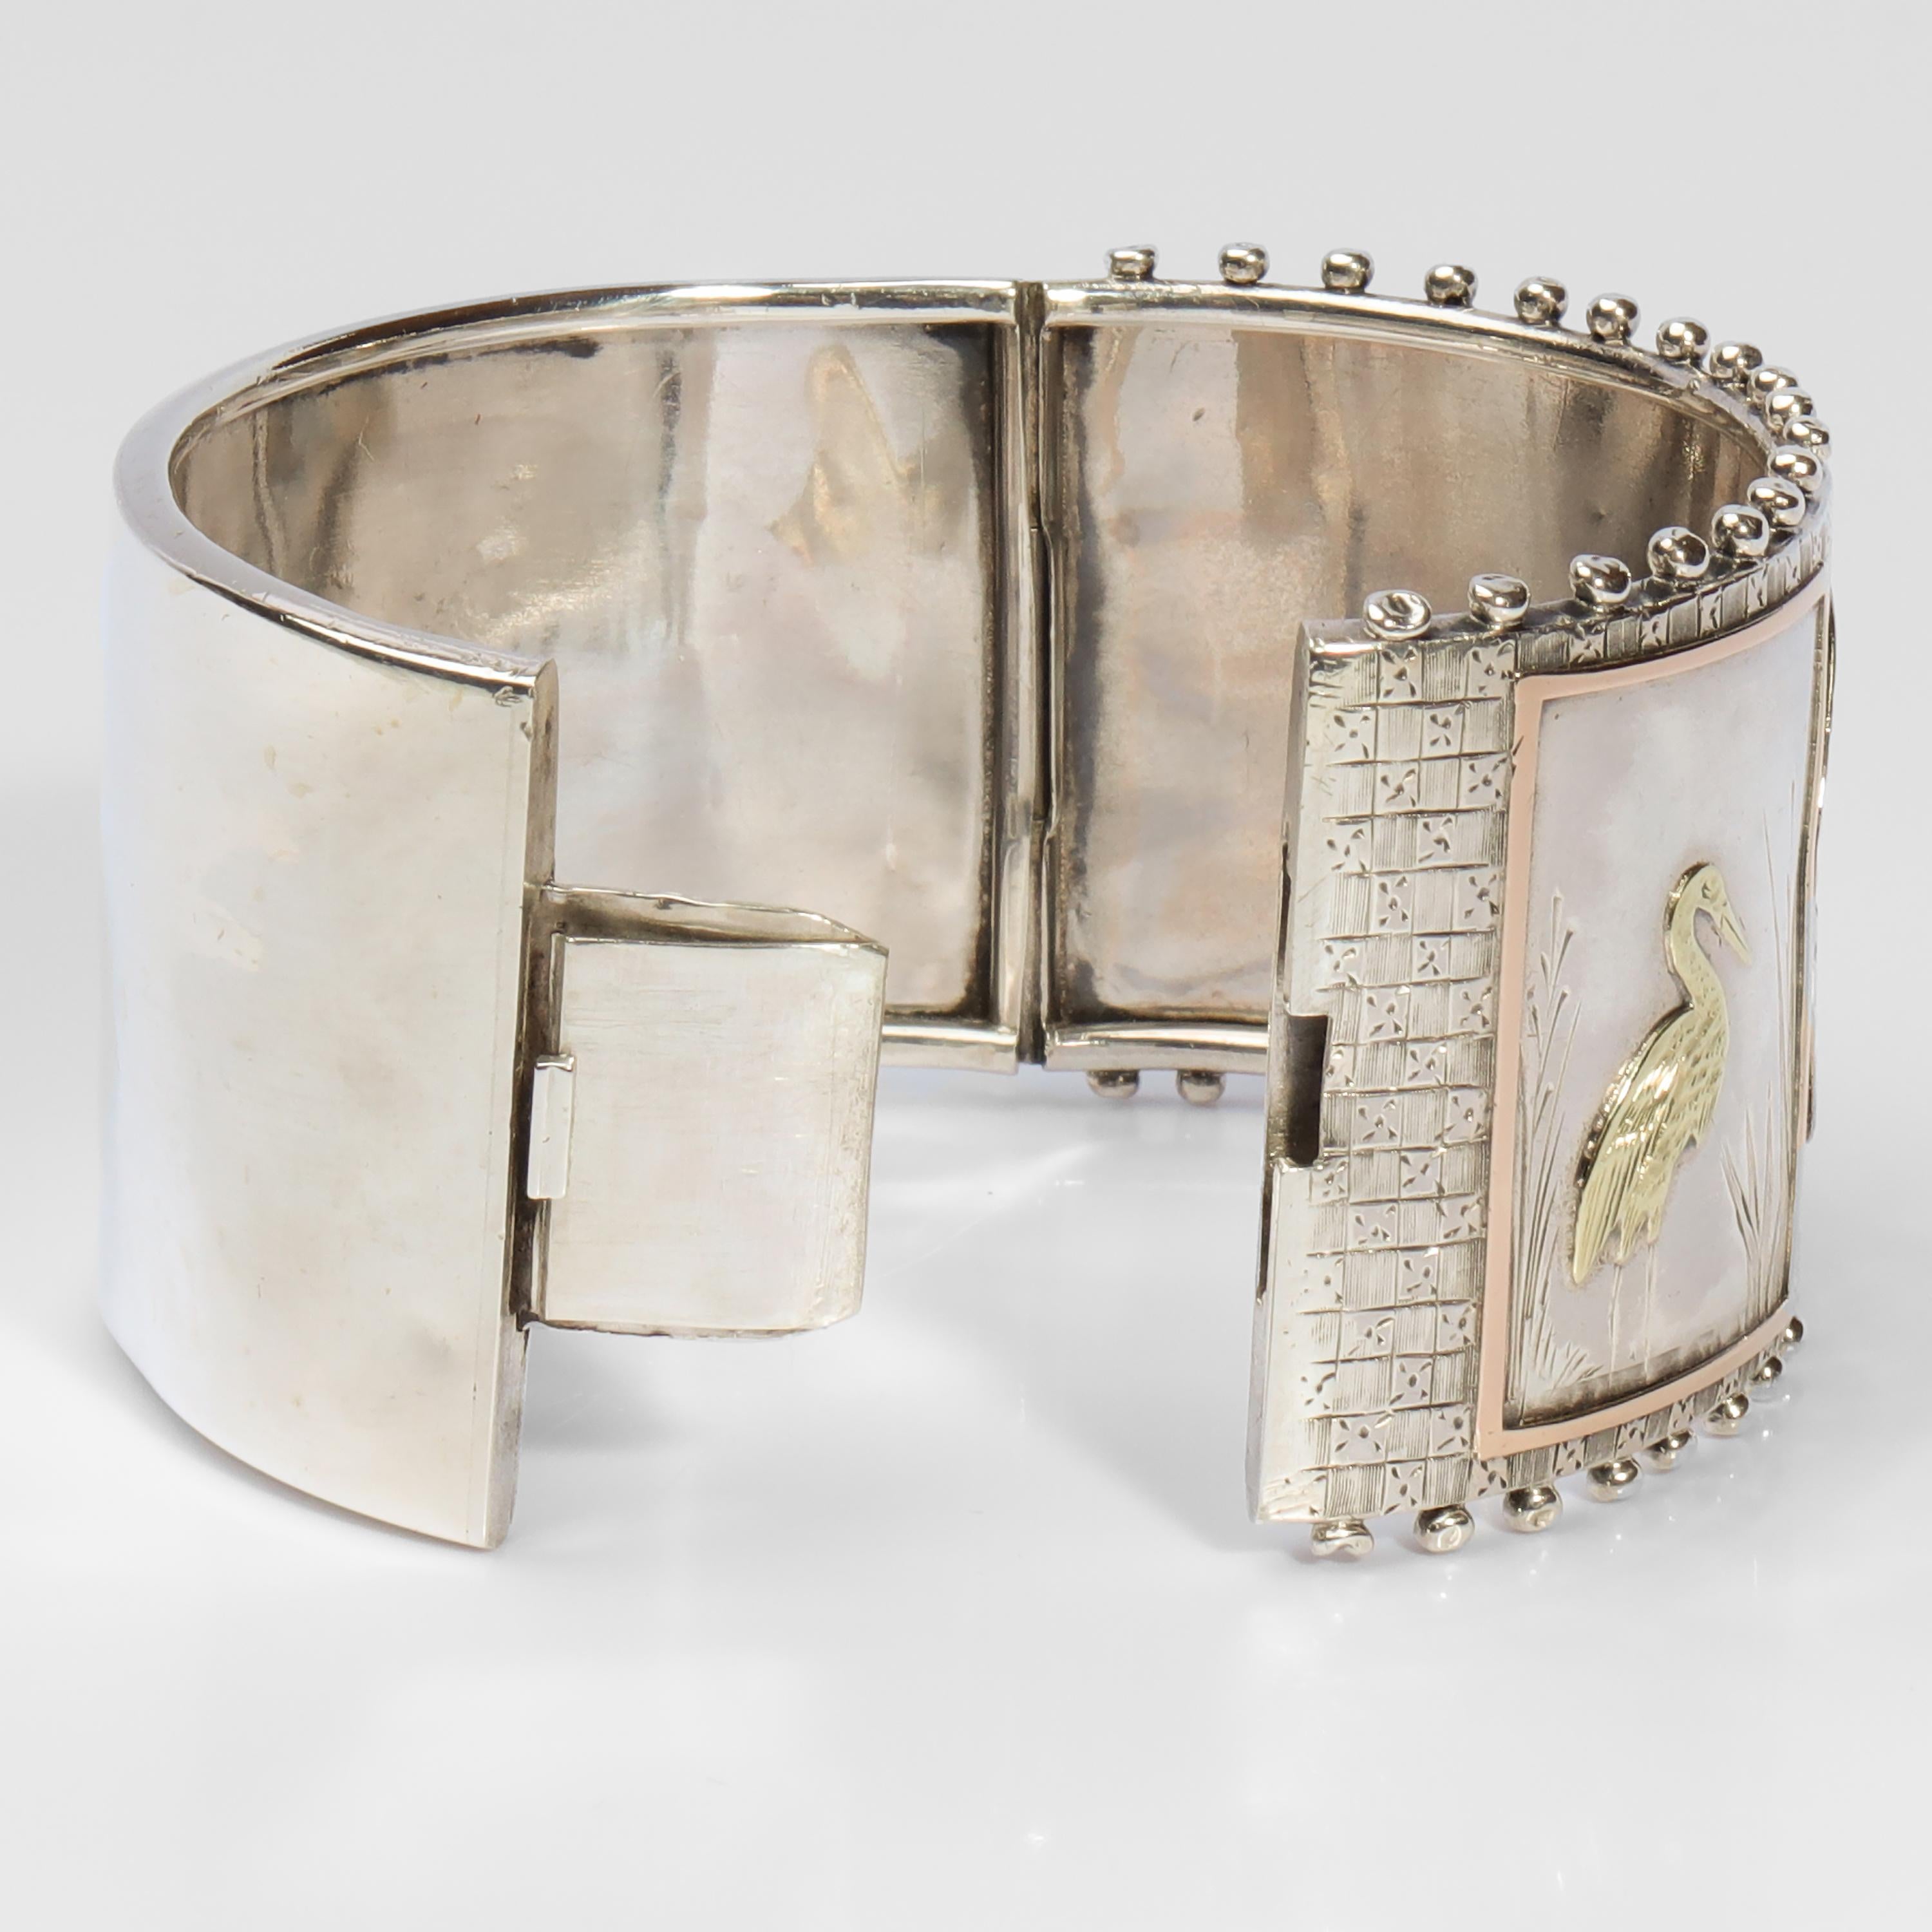 Women's Aesthetic Period Silver and Gold Panel Cuff Bracelet Late Victorian